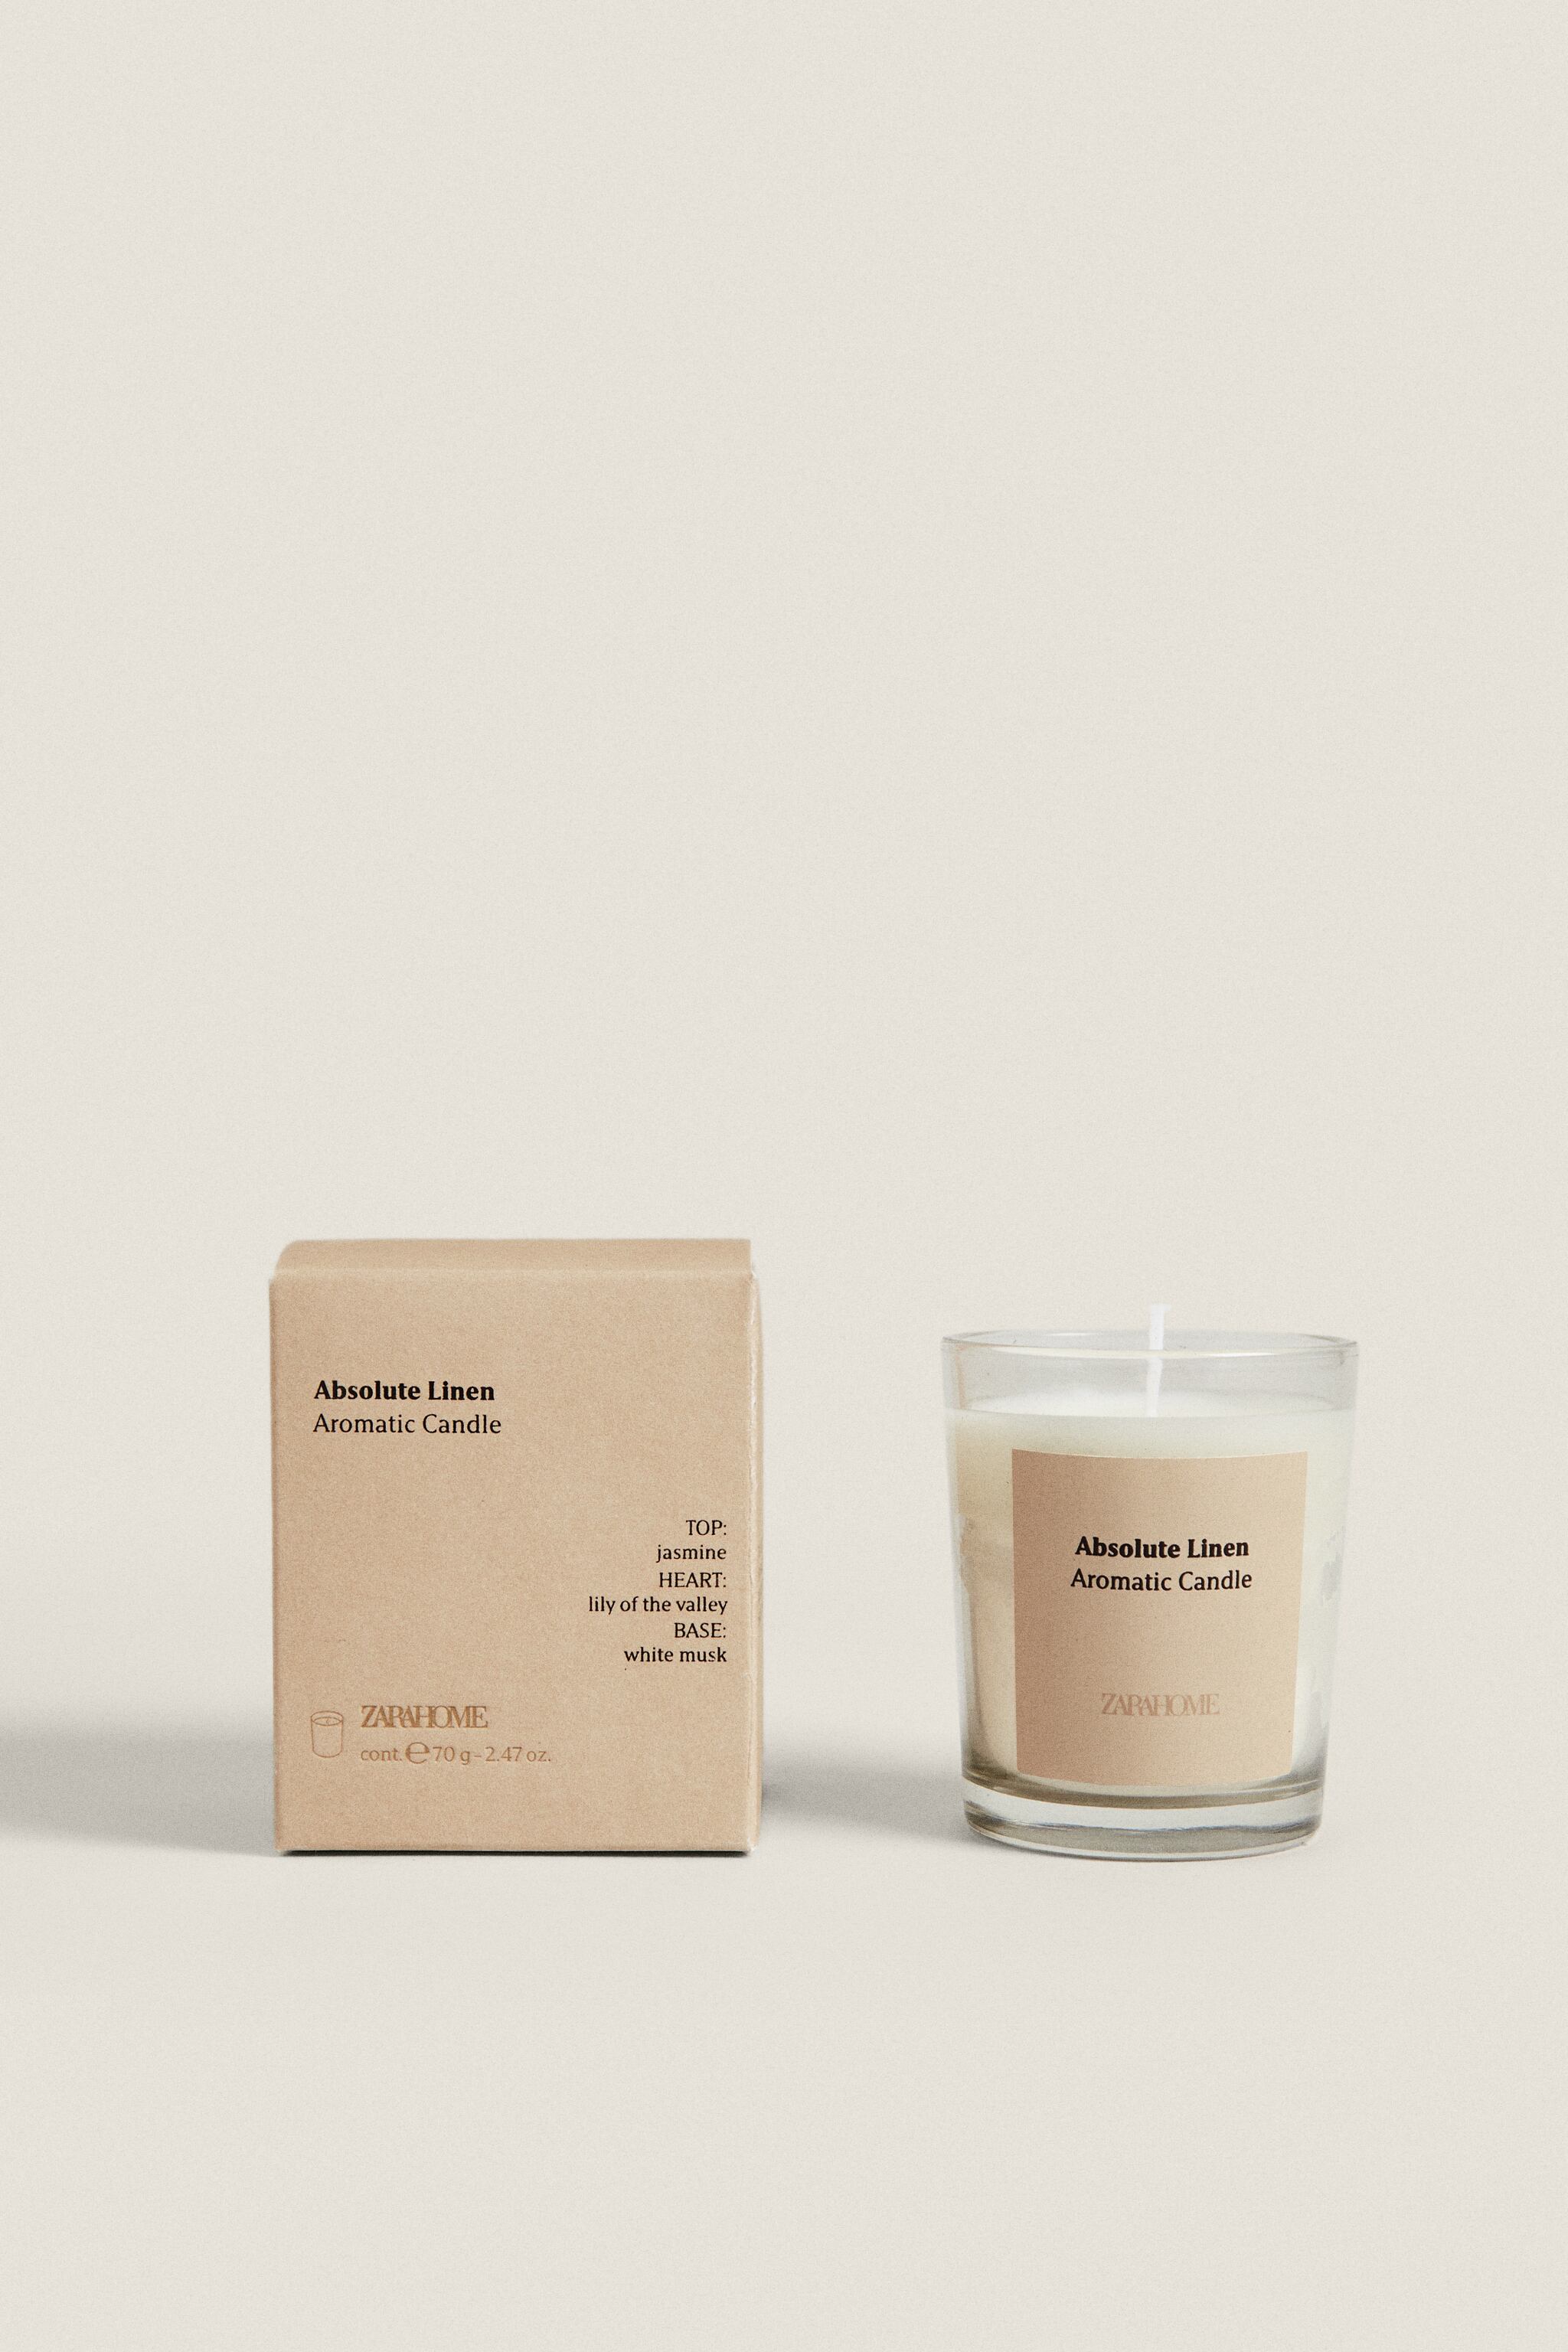 (70 G) ABSOLUTE LINEN MINI SCENTED CANDLE